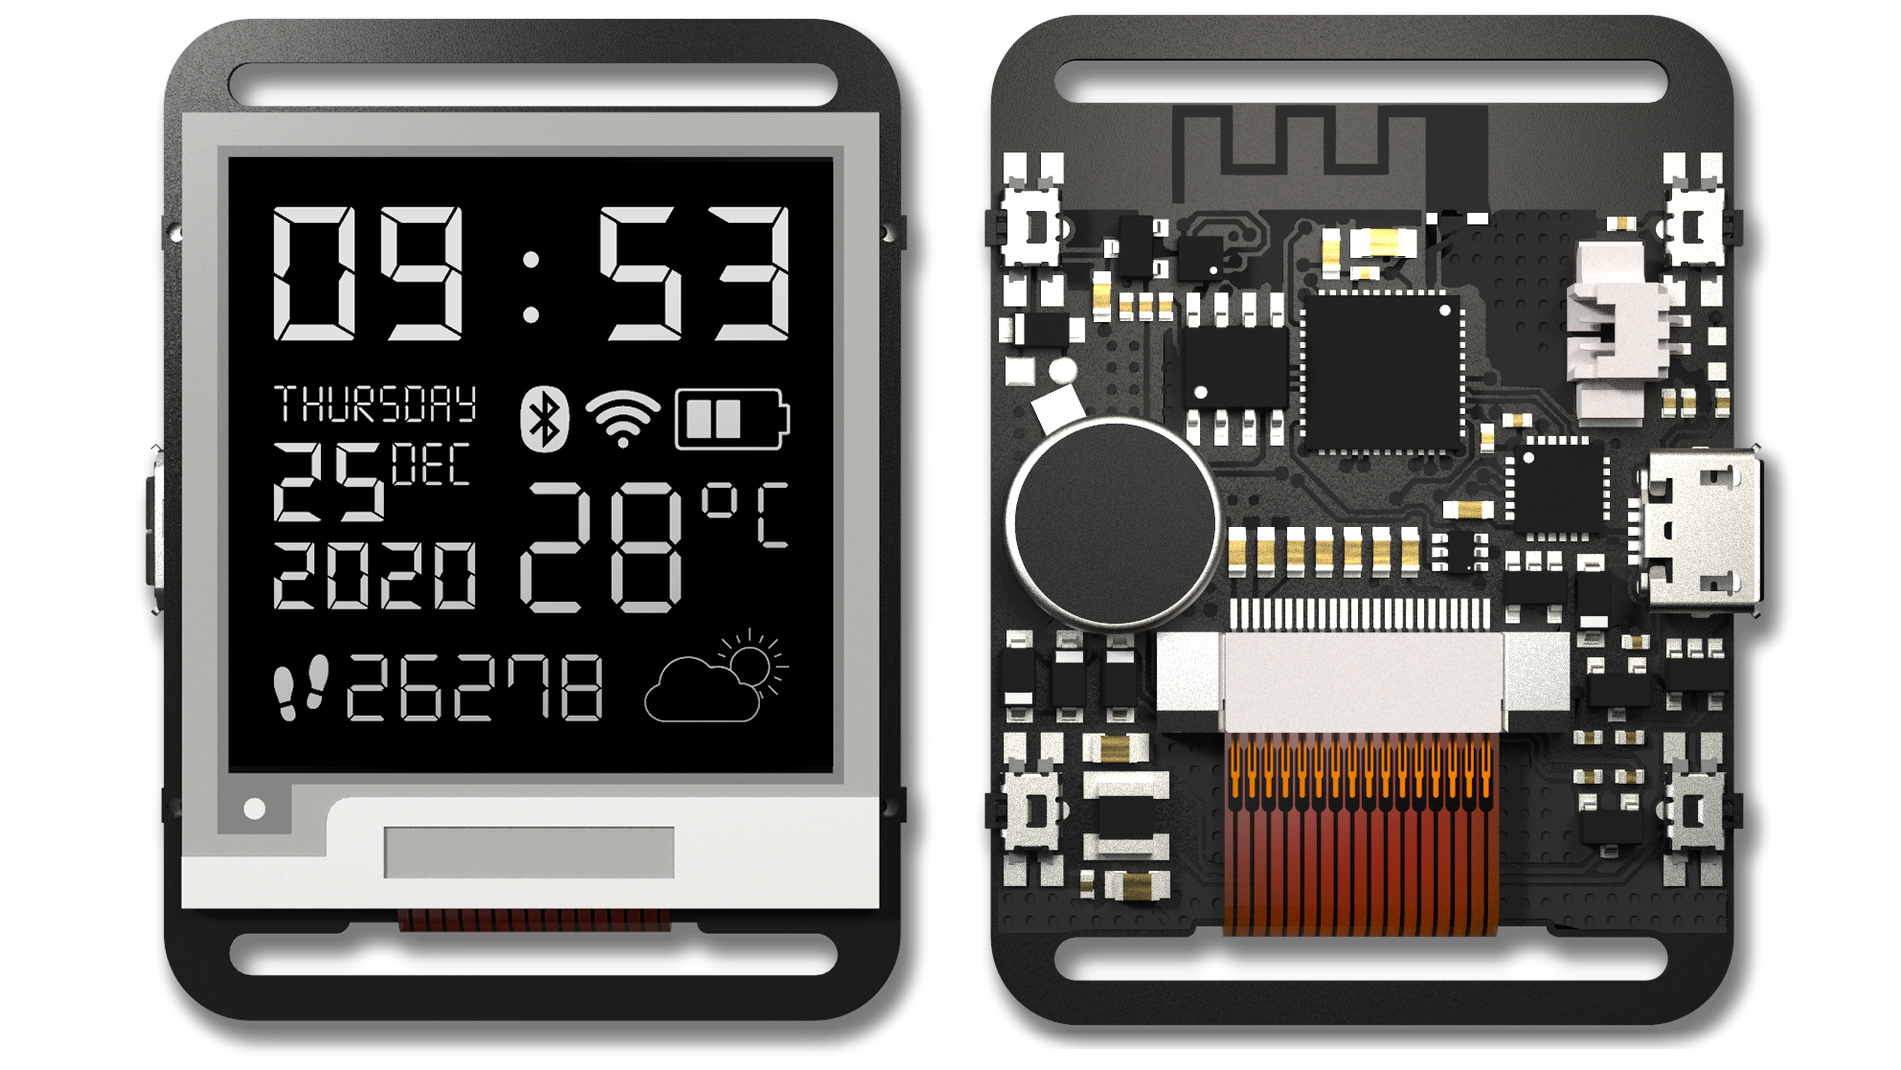 The Watchy Is an Open-Source Smartwatch for Those Who Miss the Pebble